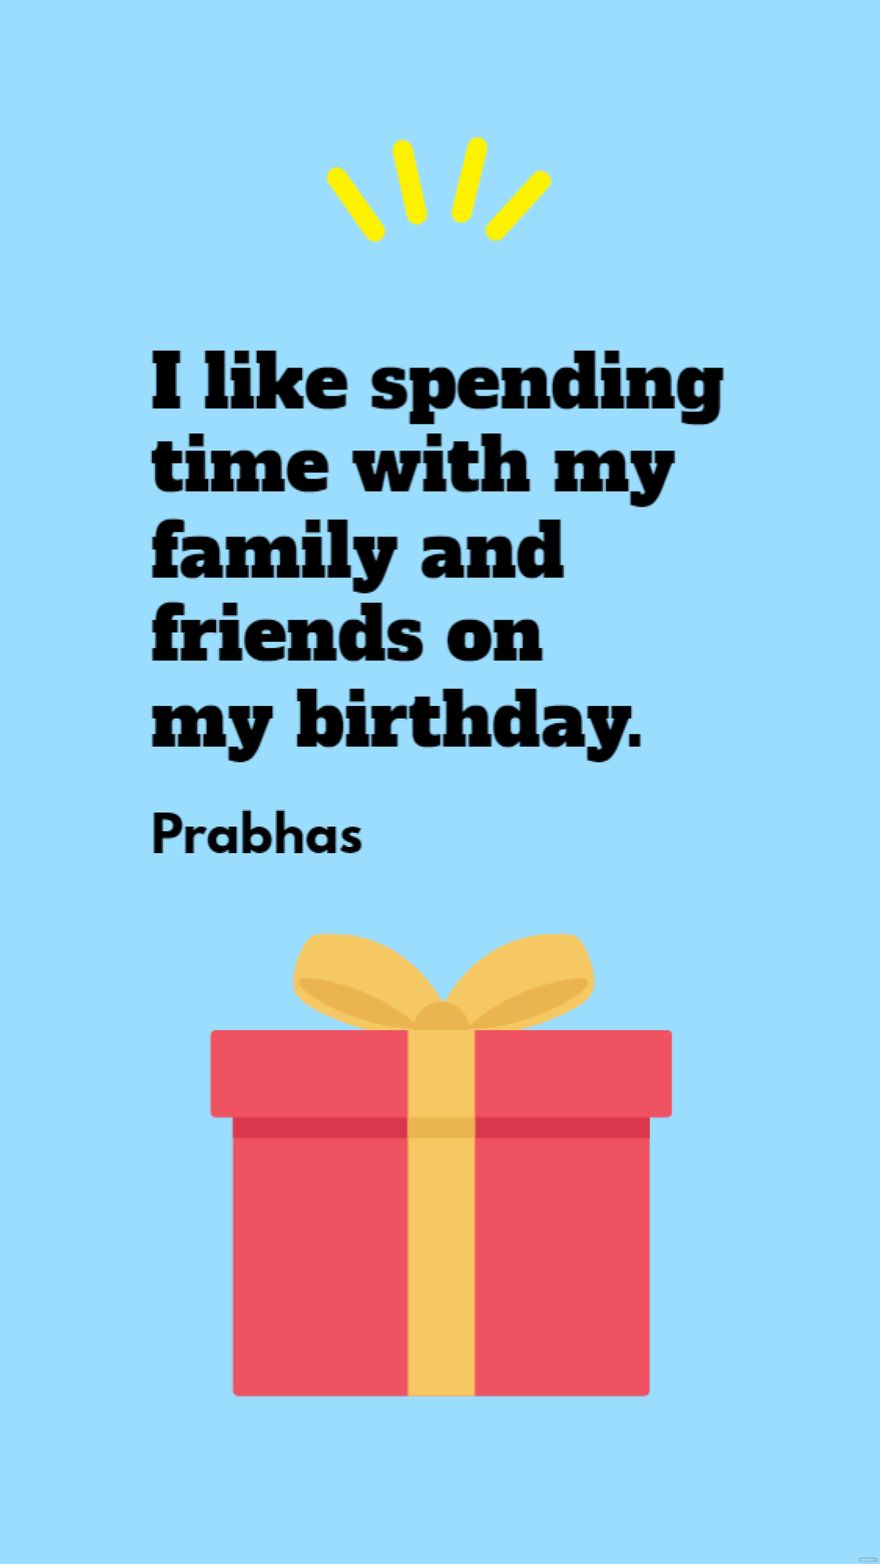 Free Prabhas - I like spending time with my family and friends on my birthday. in JPG